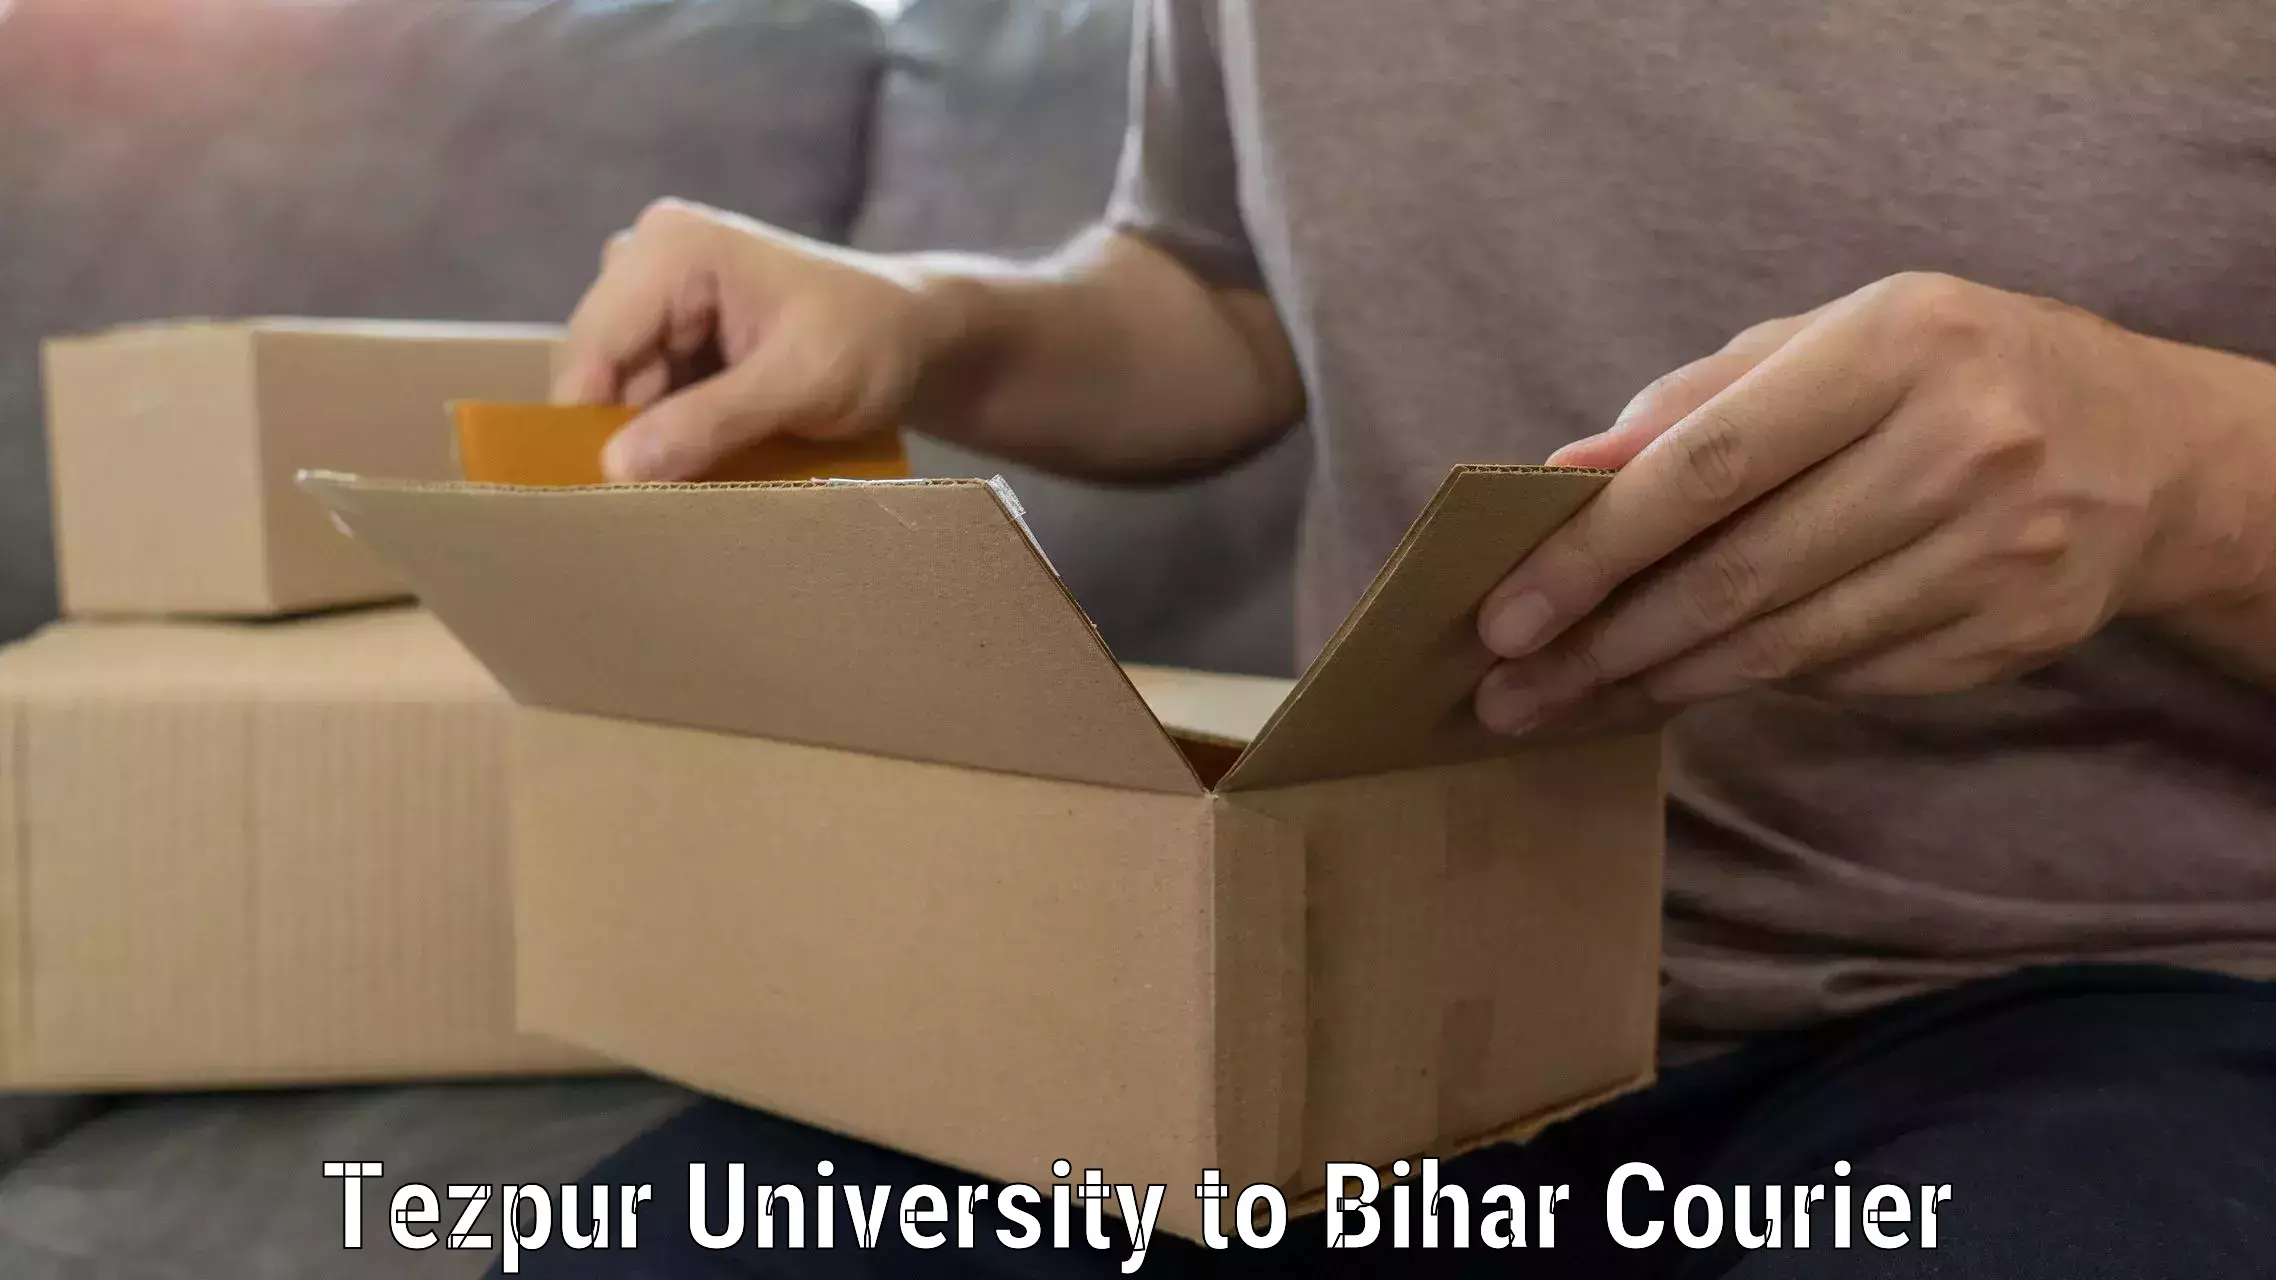 High-quality moving services Tezpur University to Chhapra